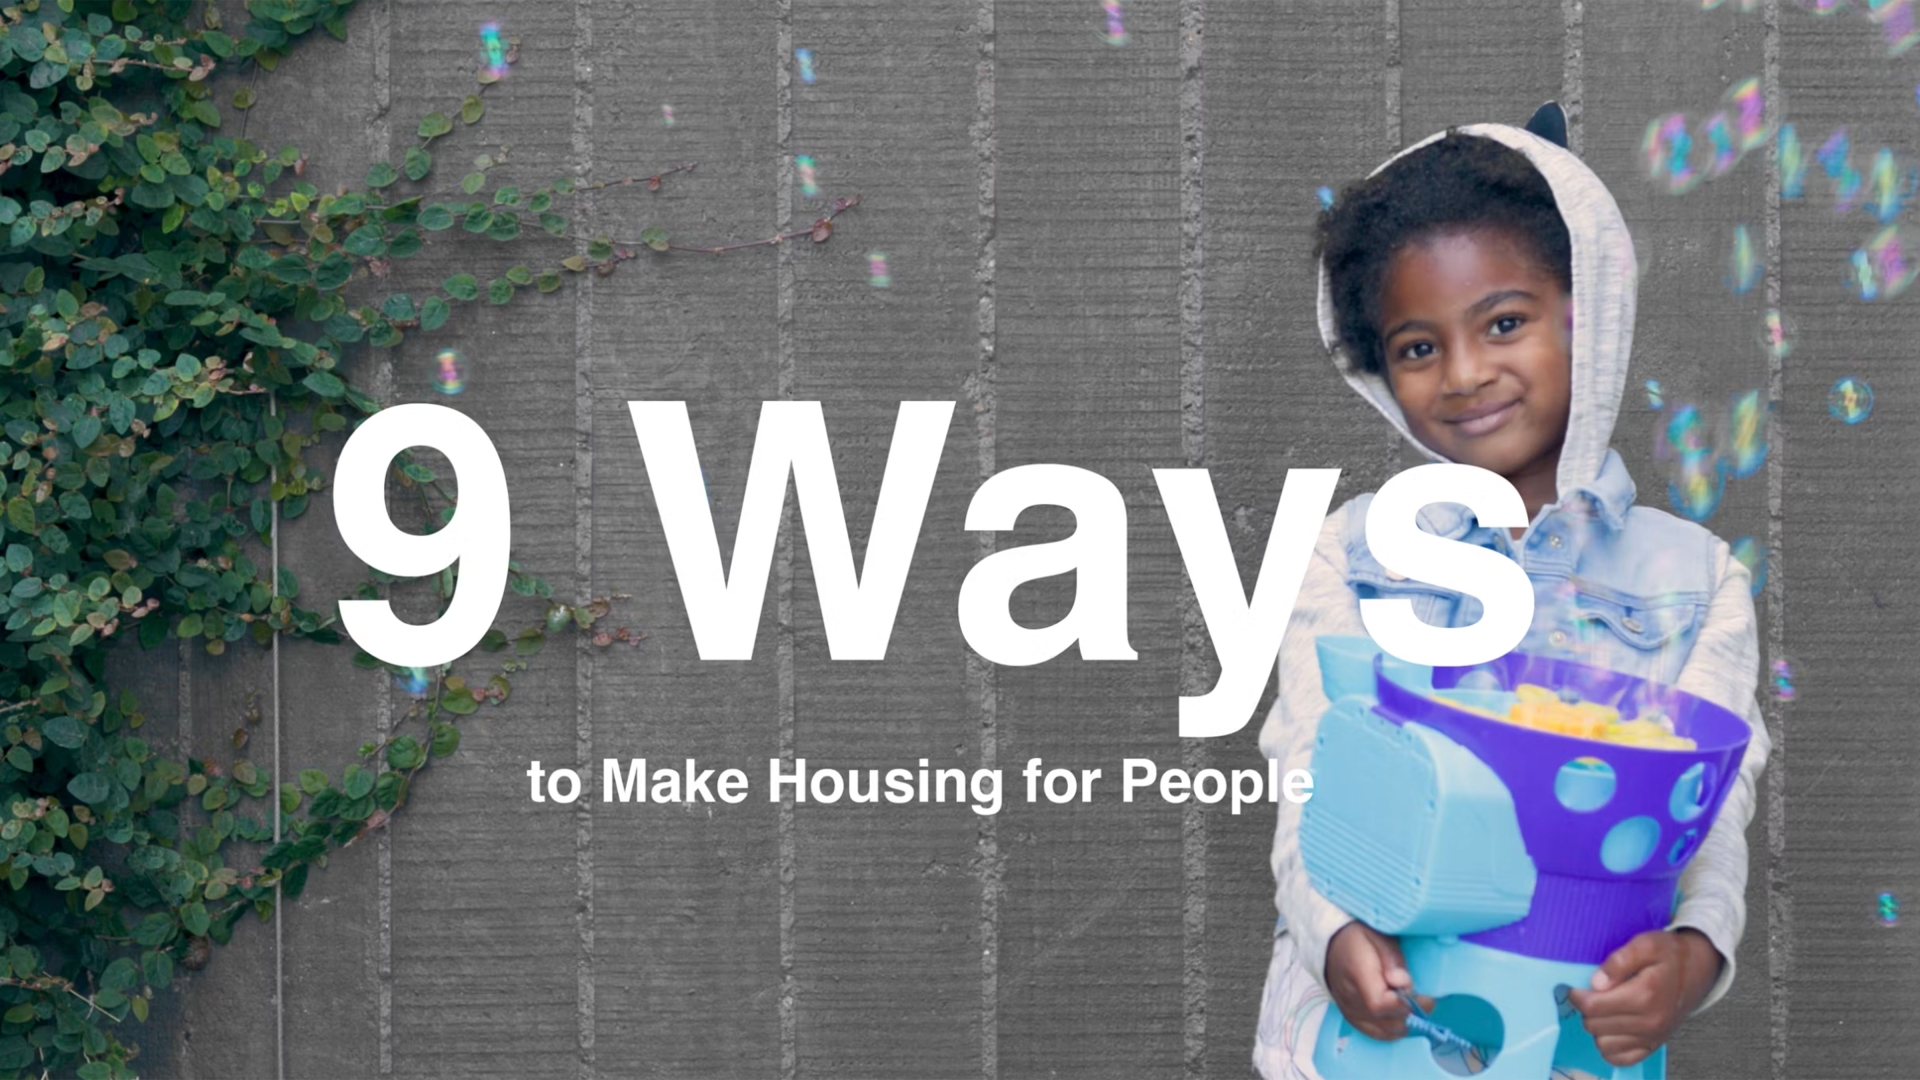 9 Ways video hero image with young girl holding a bubble machine.